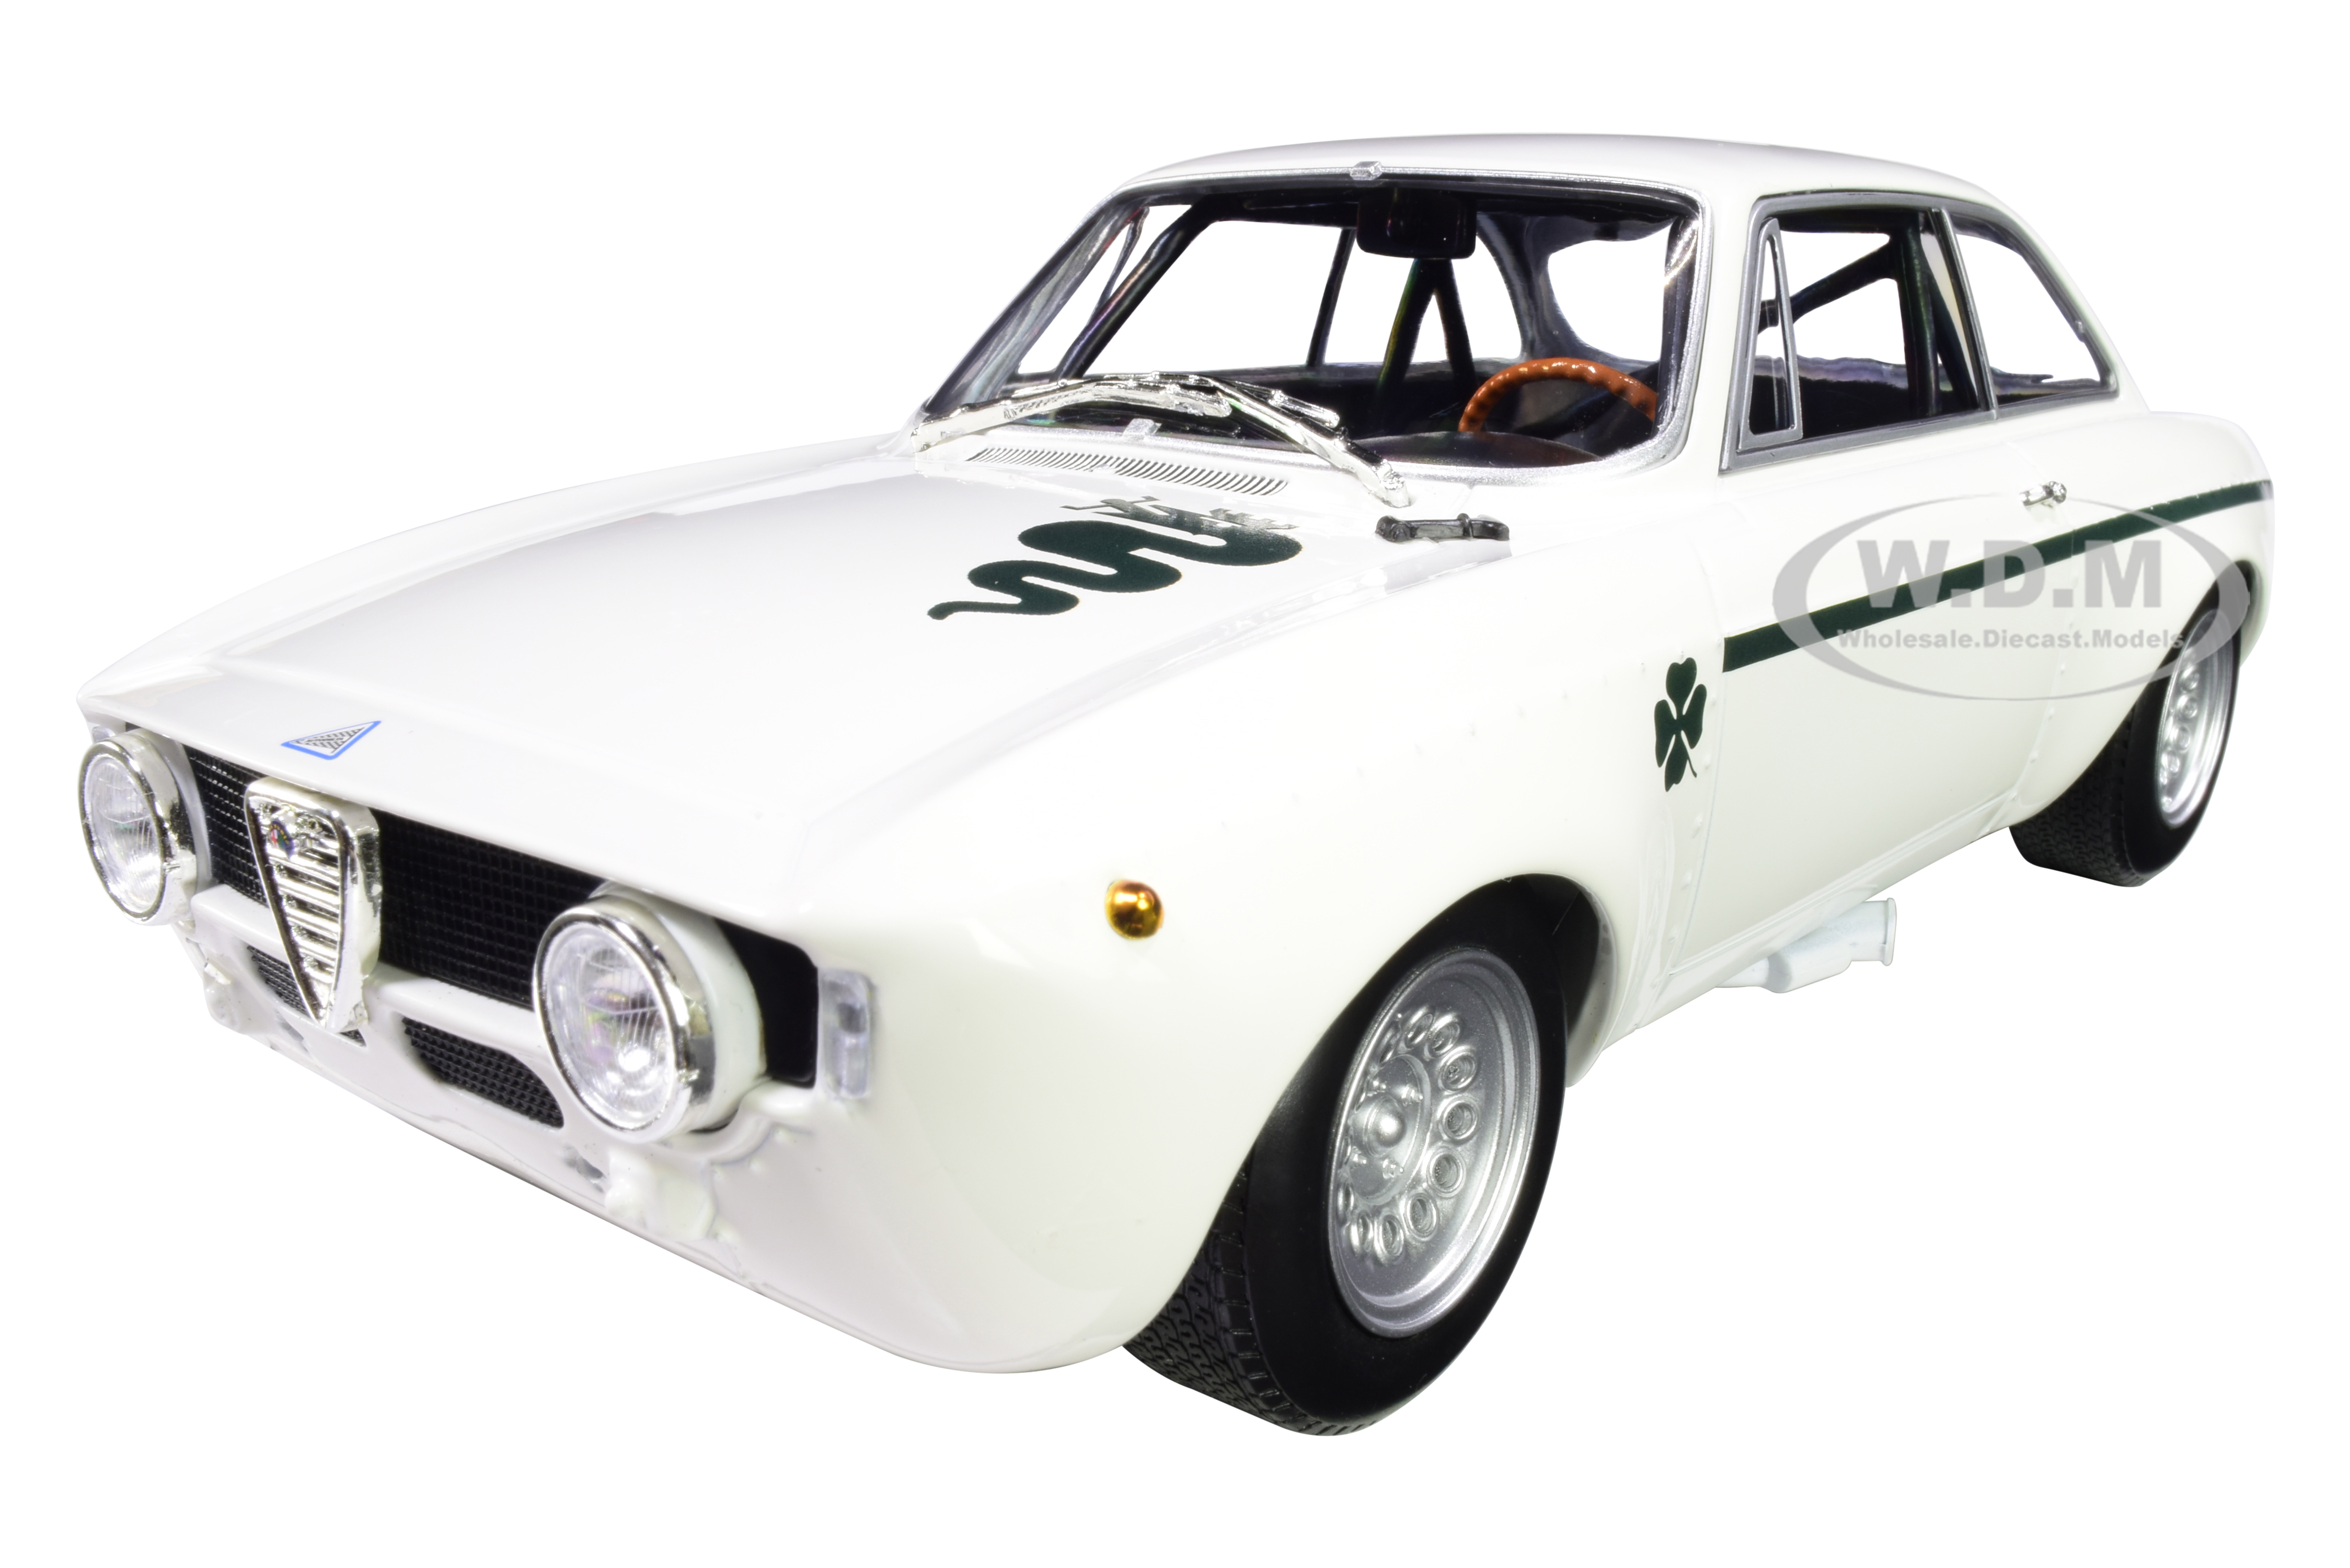 1971 Alfa Romeo Gta 1300 Junior White Limited Edition To 330 Pieces Worldwide 1/18 Diecast Model Car By Minichamps